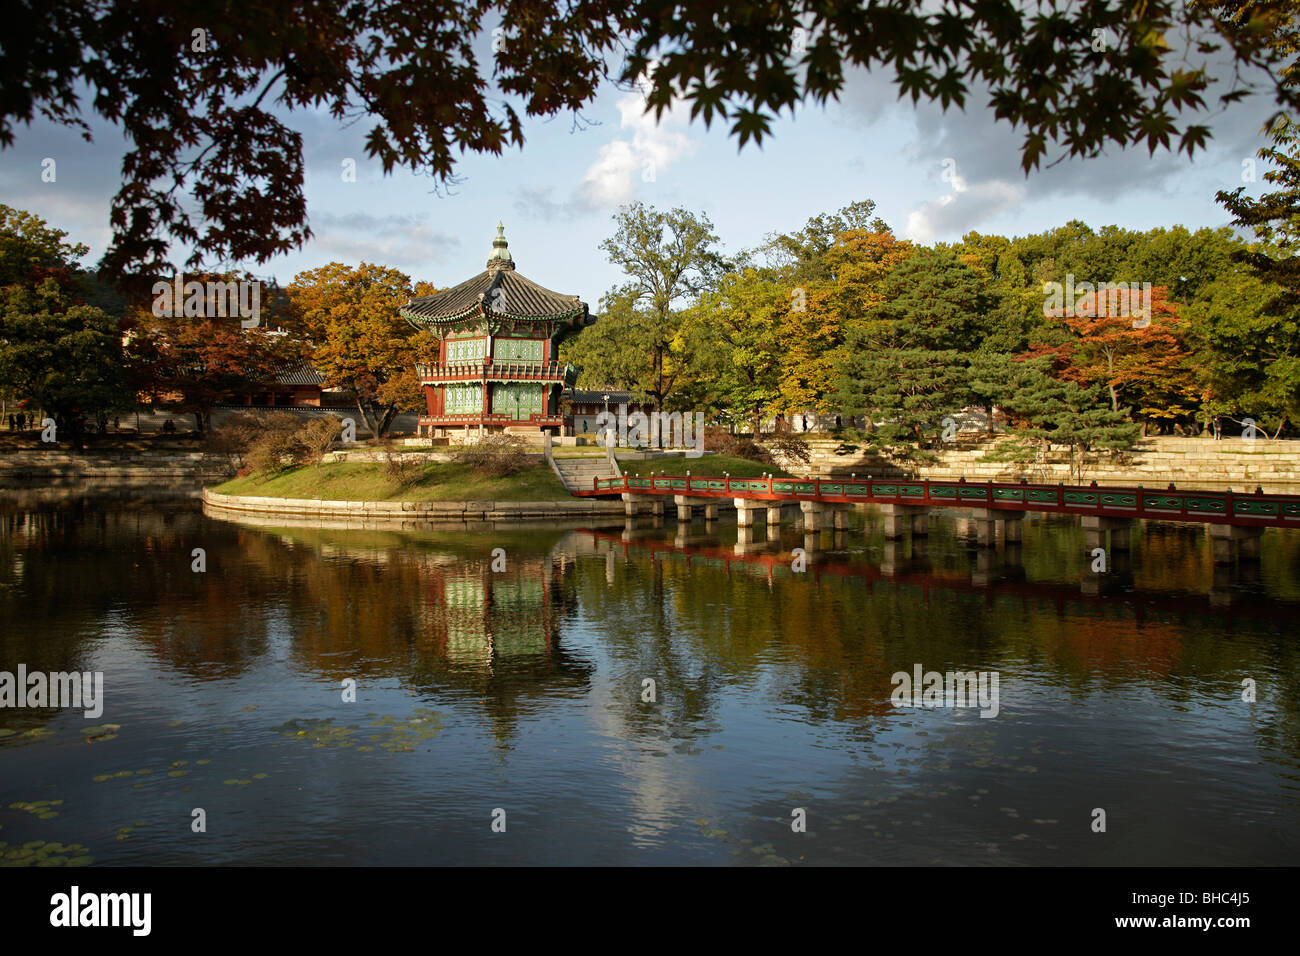 Hyangwonjeong Pavilion in the Park of Gyeongbokgung Palace in South Koreas Capital Seoul, Asia Stock Photo